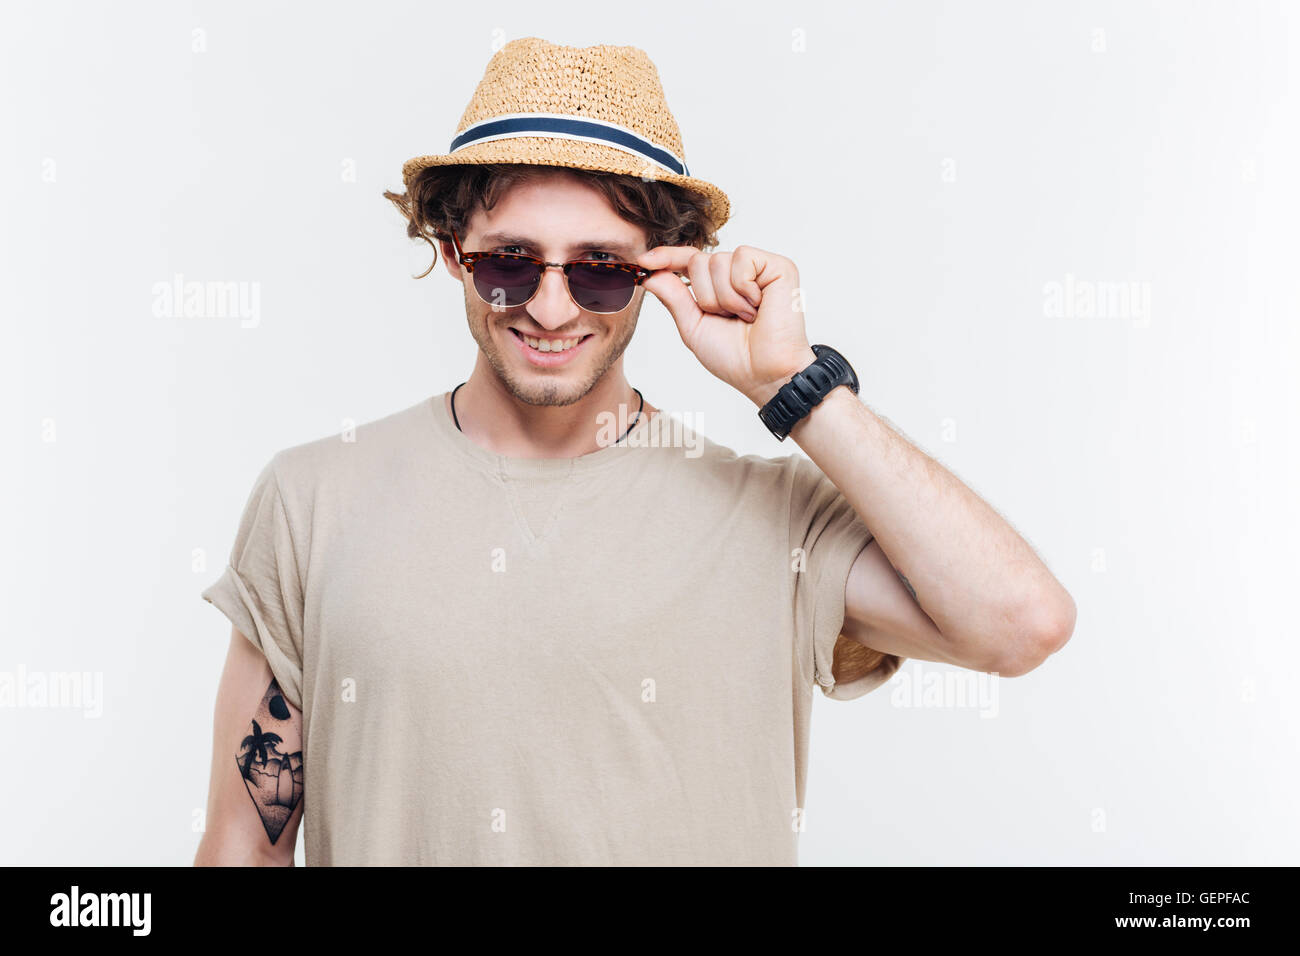 Portrait of a smiling young man in hat taking off his eyeglasses Stock Photo